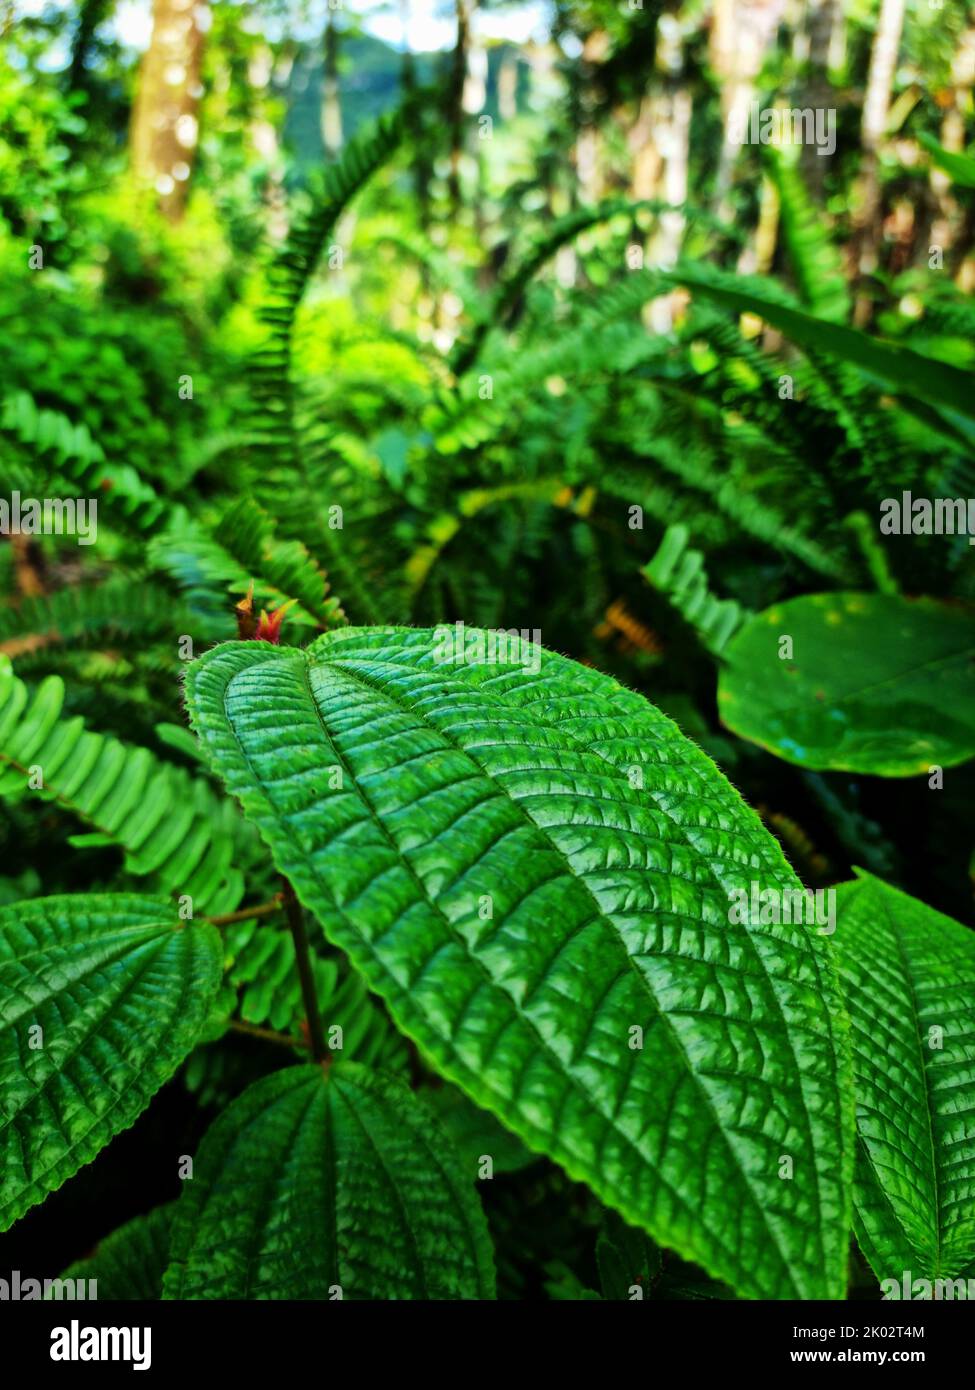 A vertical shot of green leaves of Koster's Curse (Clidemia hirta) plant Stock Photo